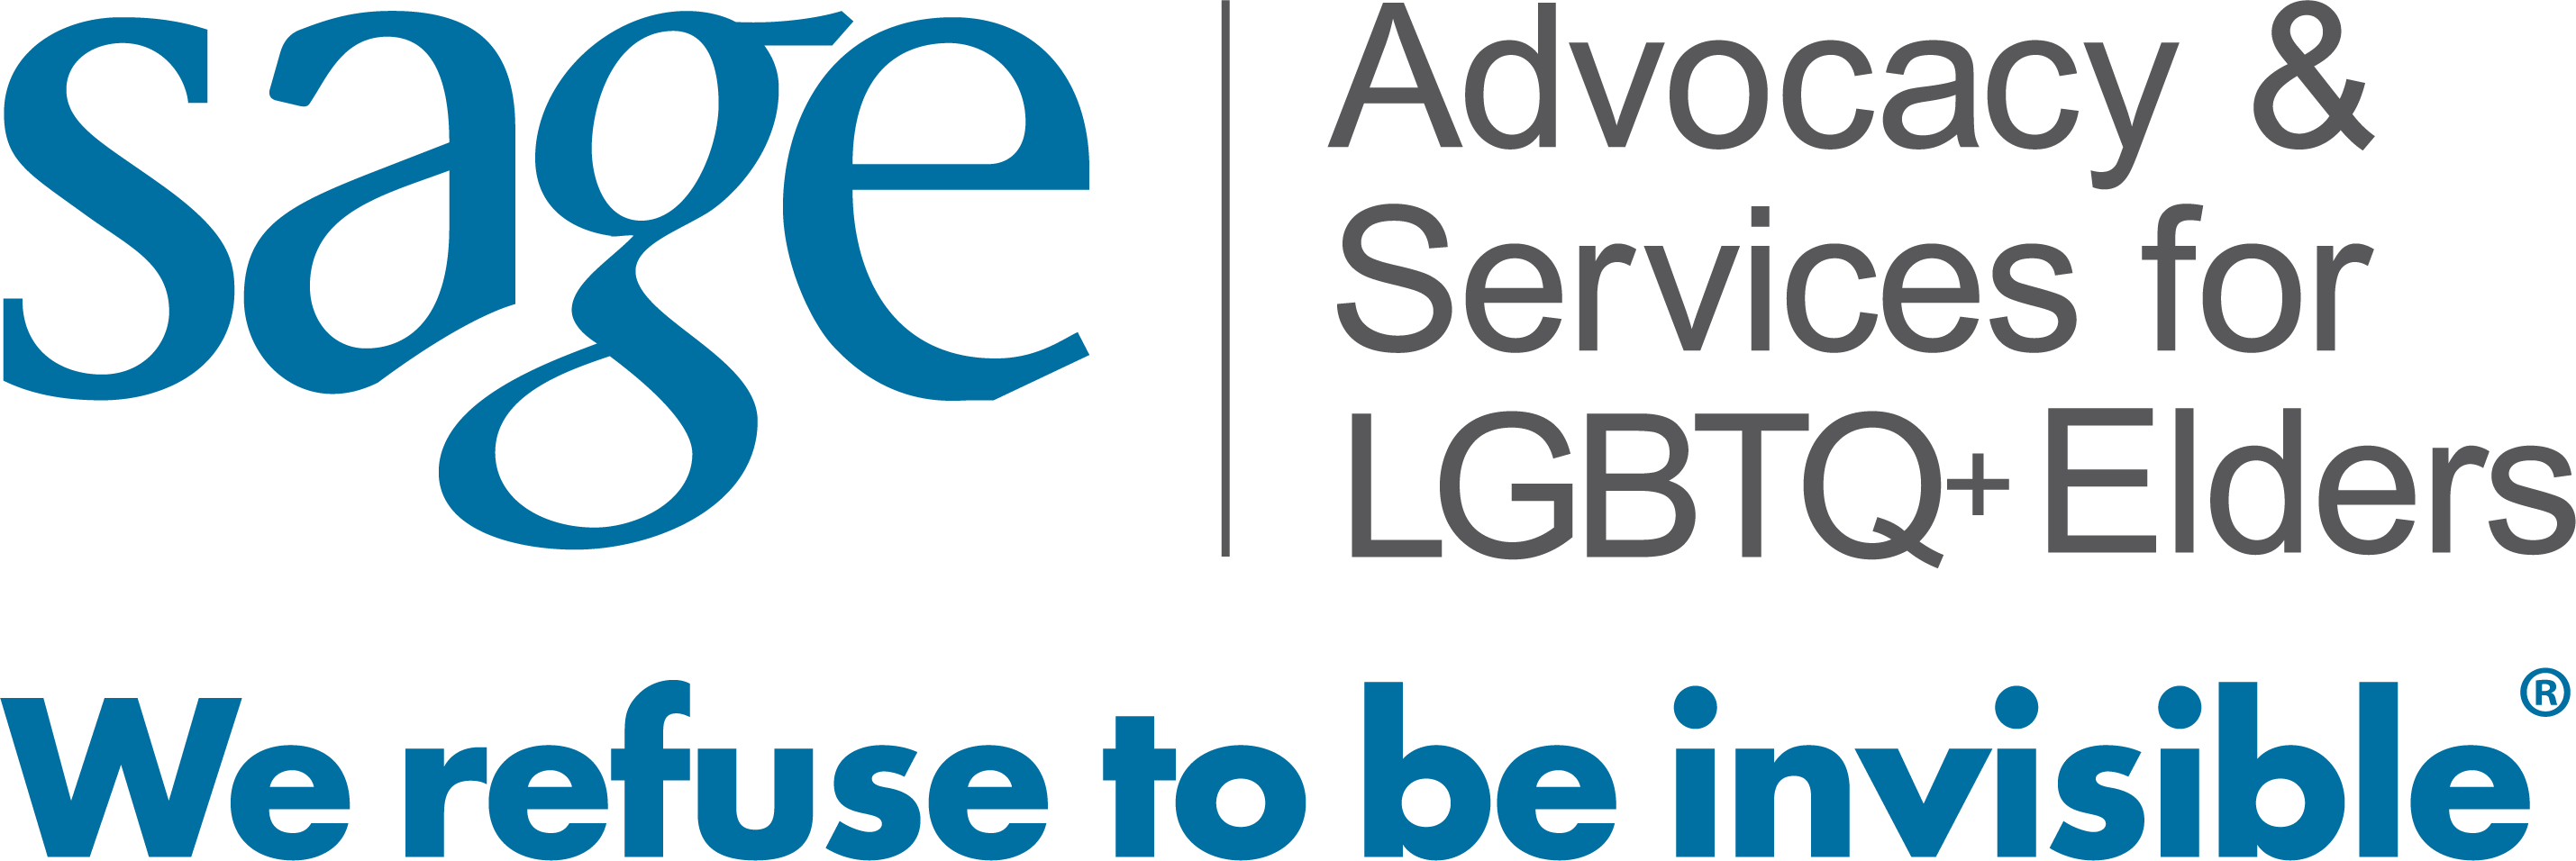 Advocacy & Services for LGBTQ+ Elders